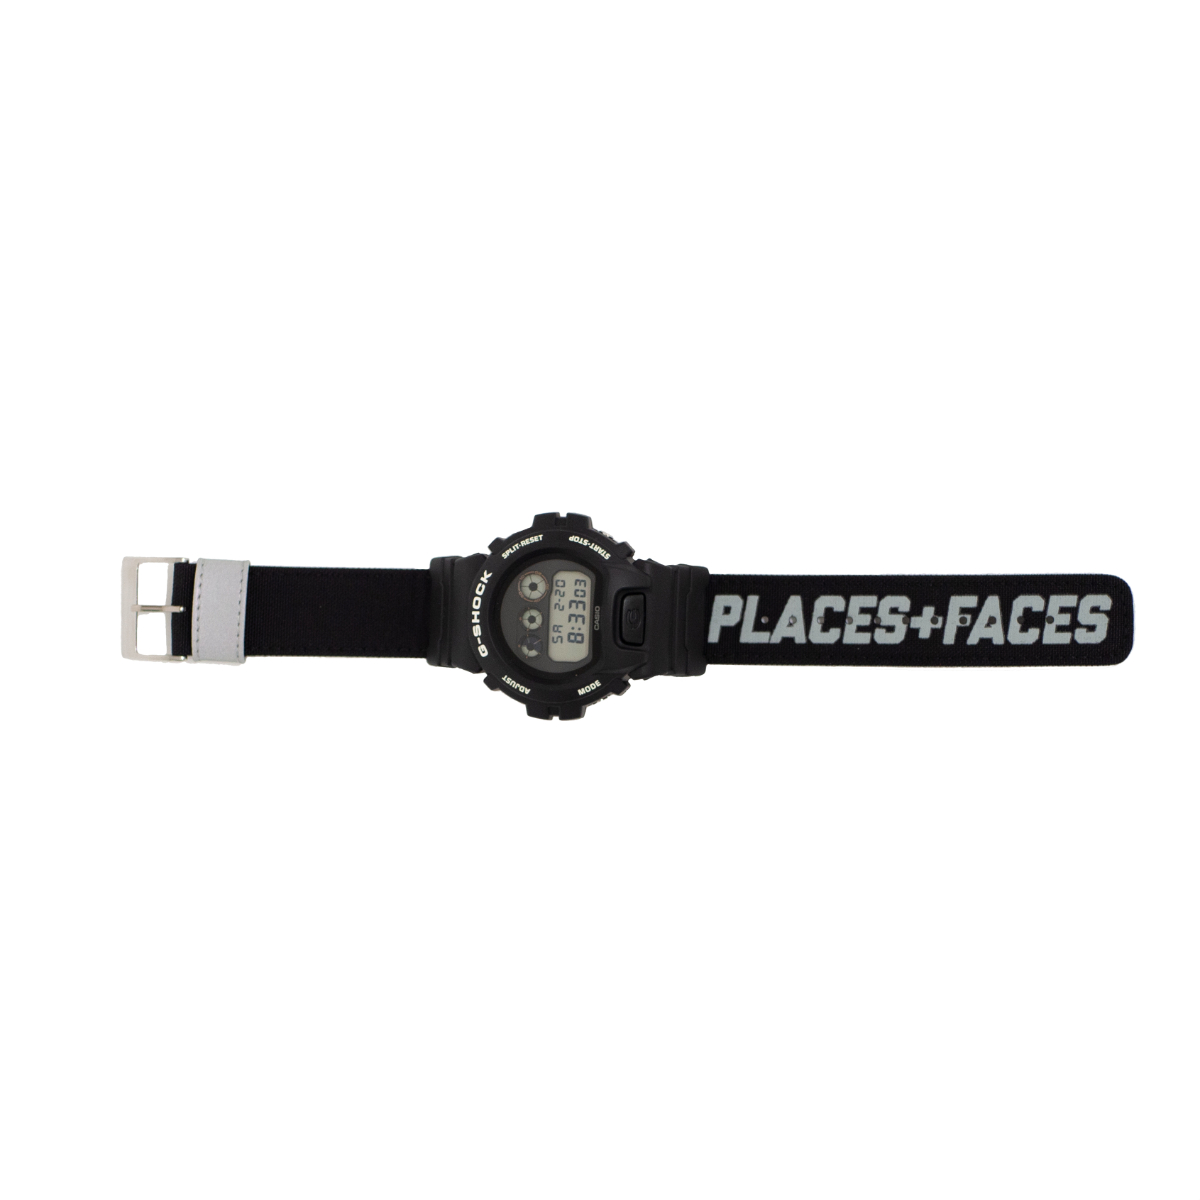 Places + Faces Customises a G-Shock Timepiece for New Collab